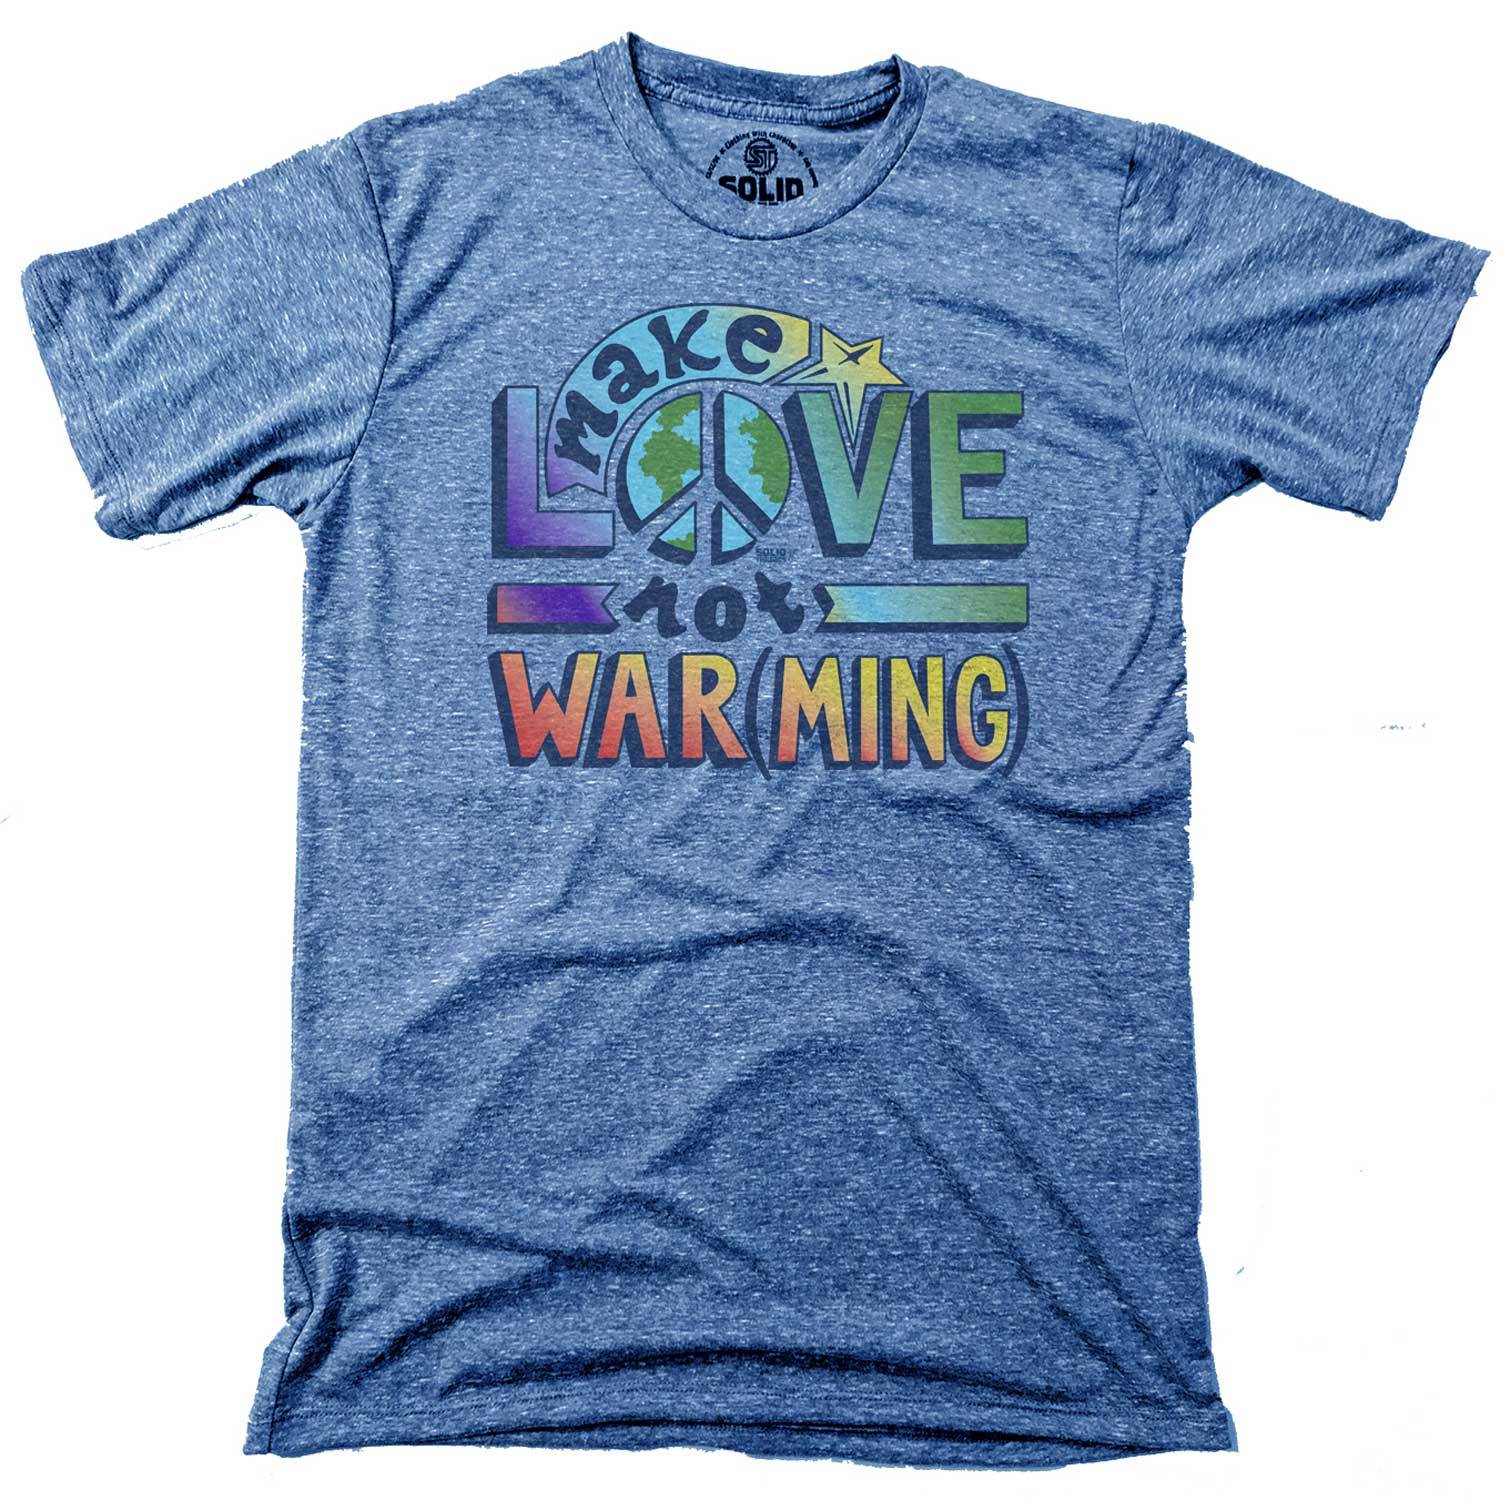 Men's Make Love Not Warming Vintage Inspired T-Shirt | Retro Environmentalism Graphic Tee | Solid Threads